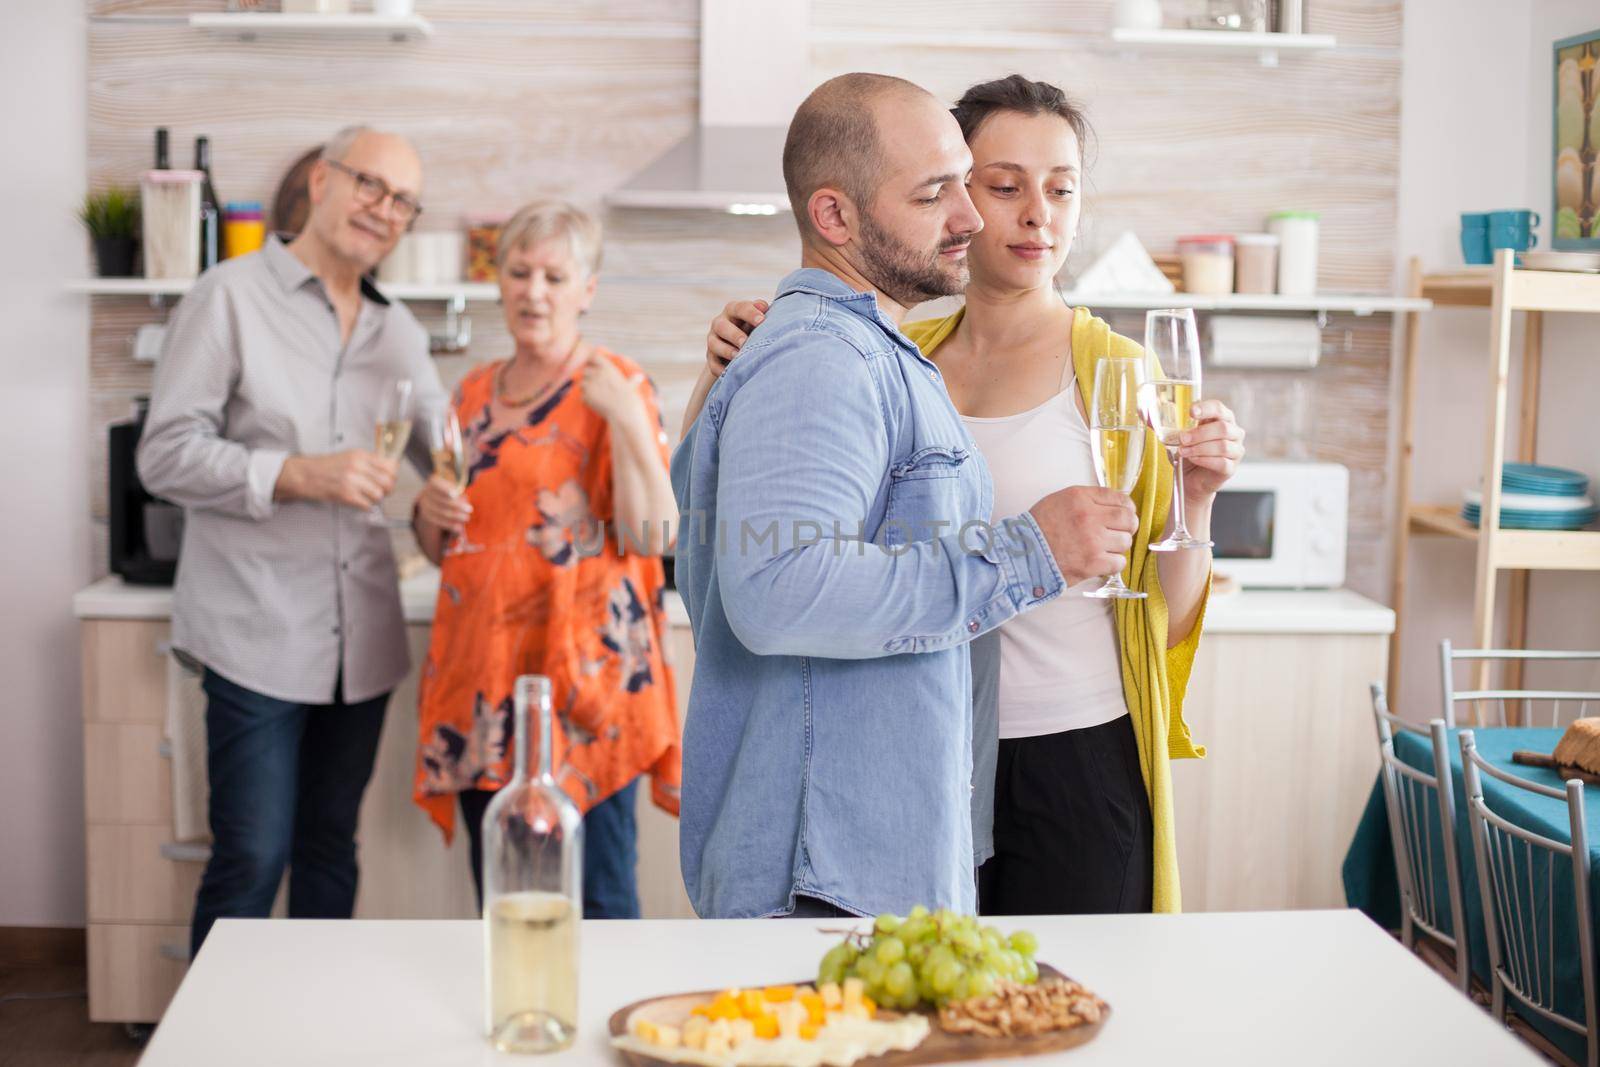 Couple holding and looking at glasses of wine in kitchen during brunch with family. Senior mother and father looking at son and his wife.